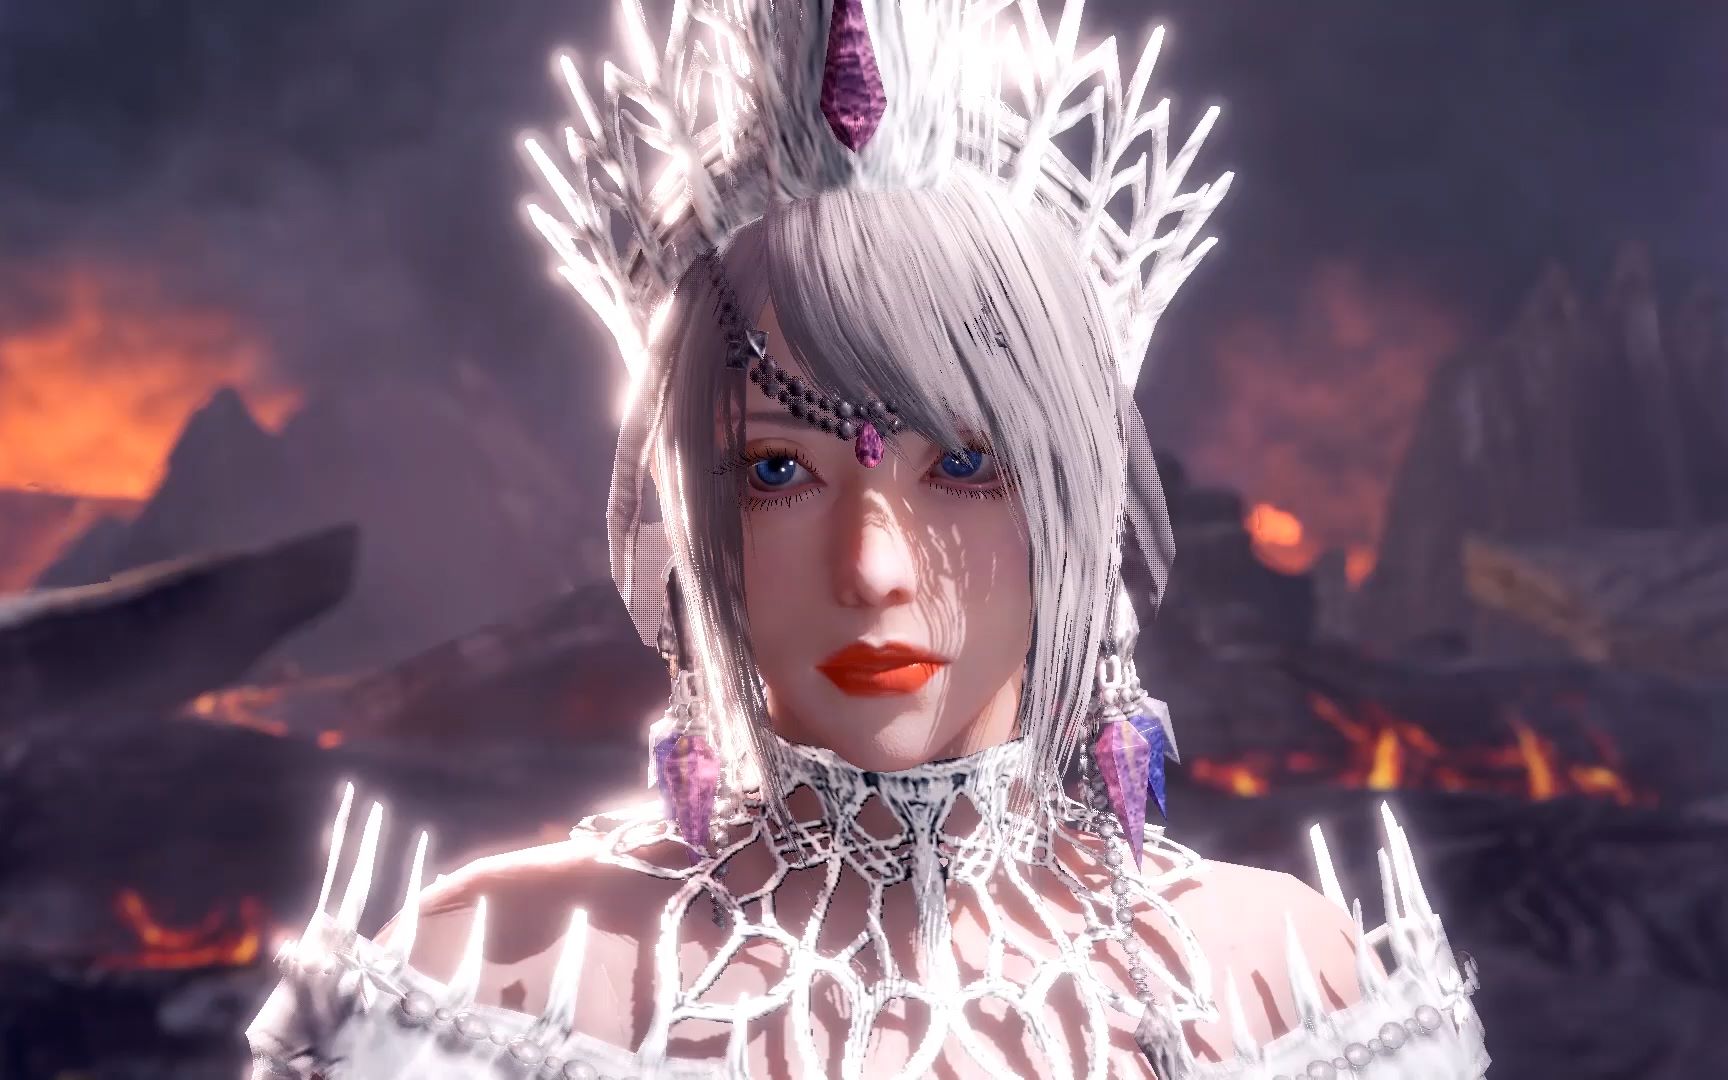 Monster Hunter world mod cute pinch face, hairstyle and beauty - BiliBili